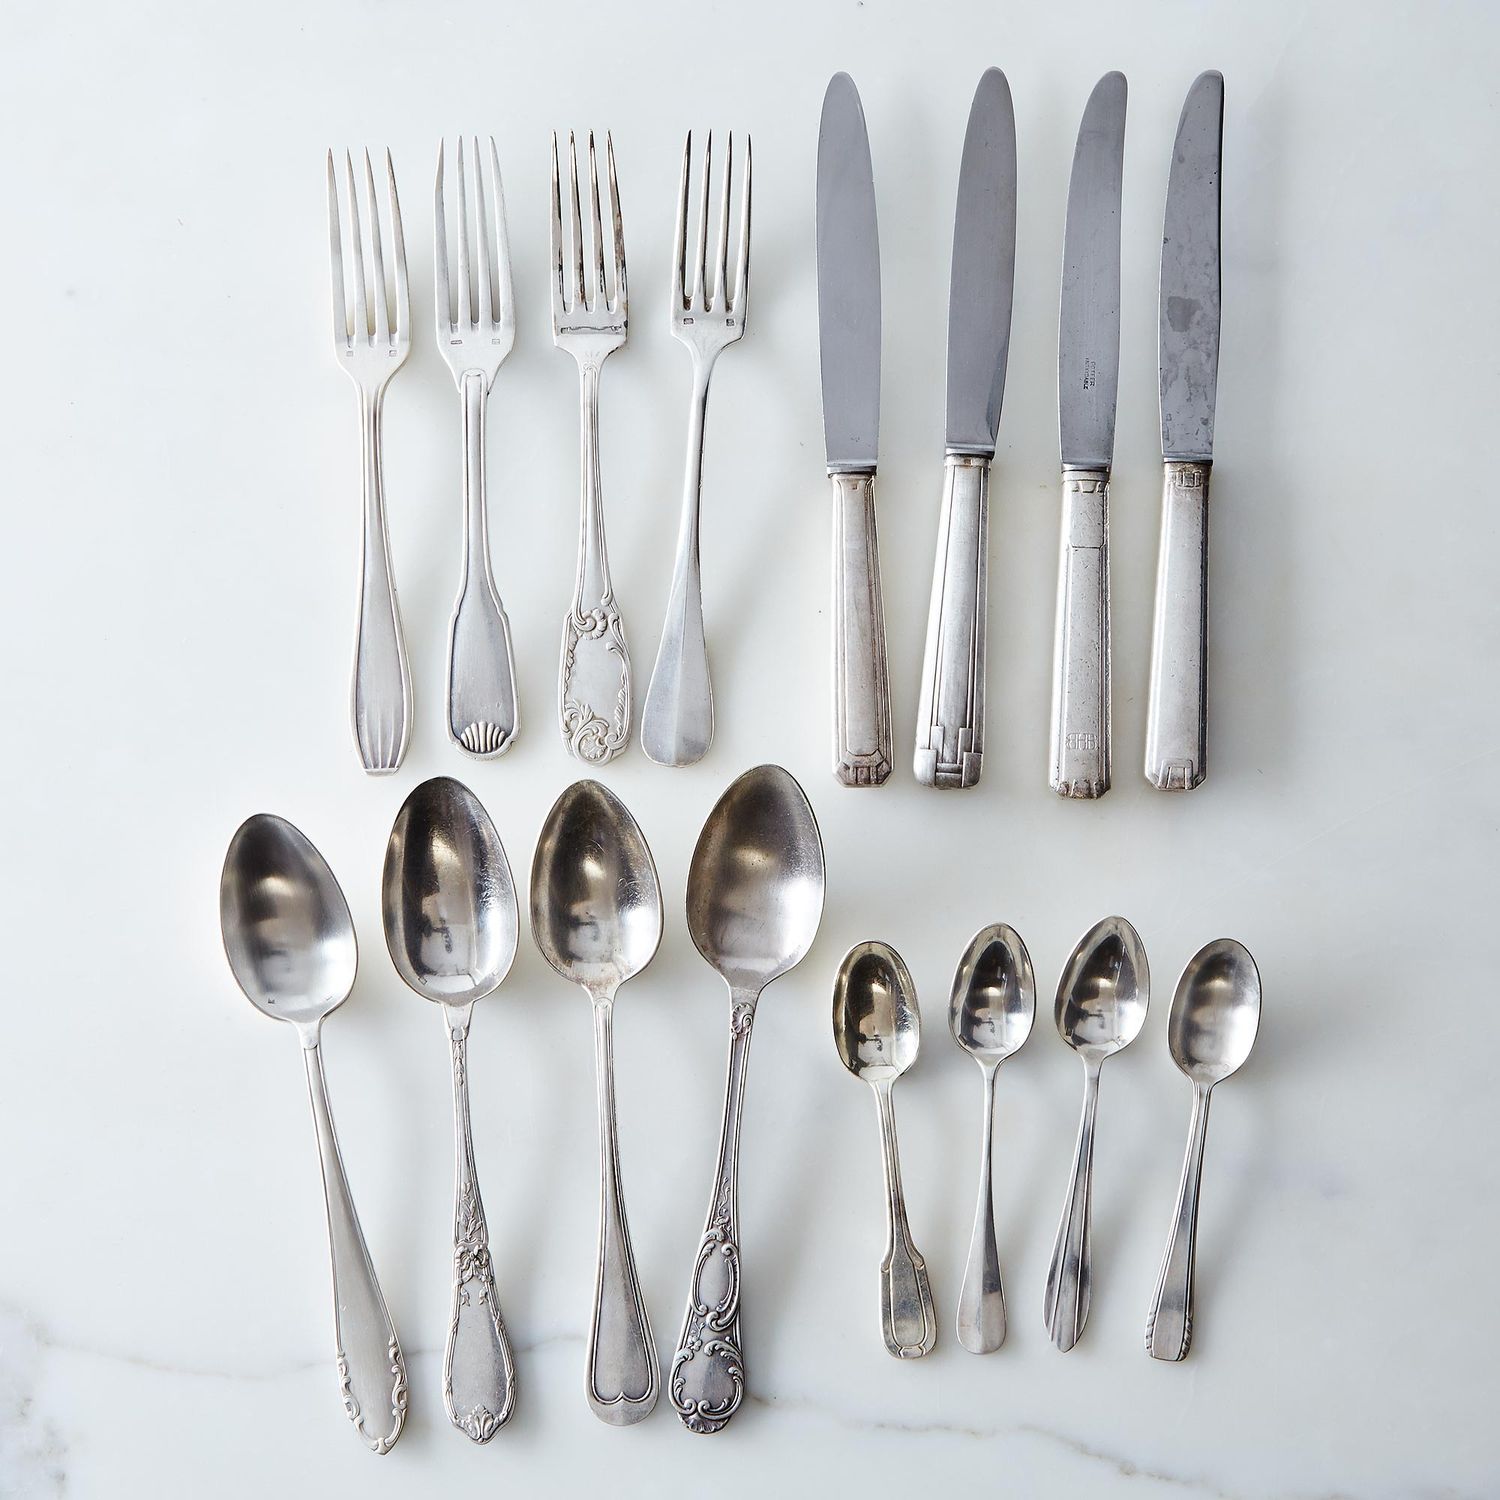 The Food52 Vintage French Silverware, Silver-Plated, 4-Piece & 20